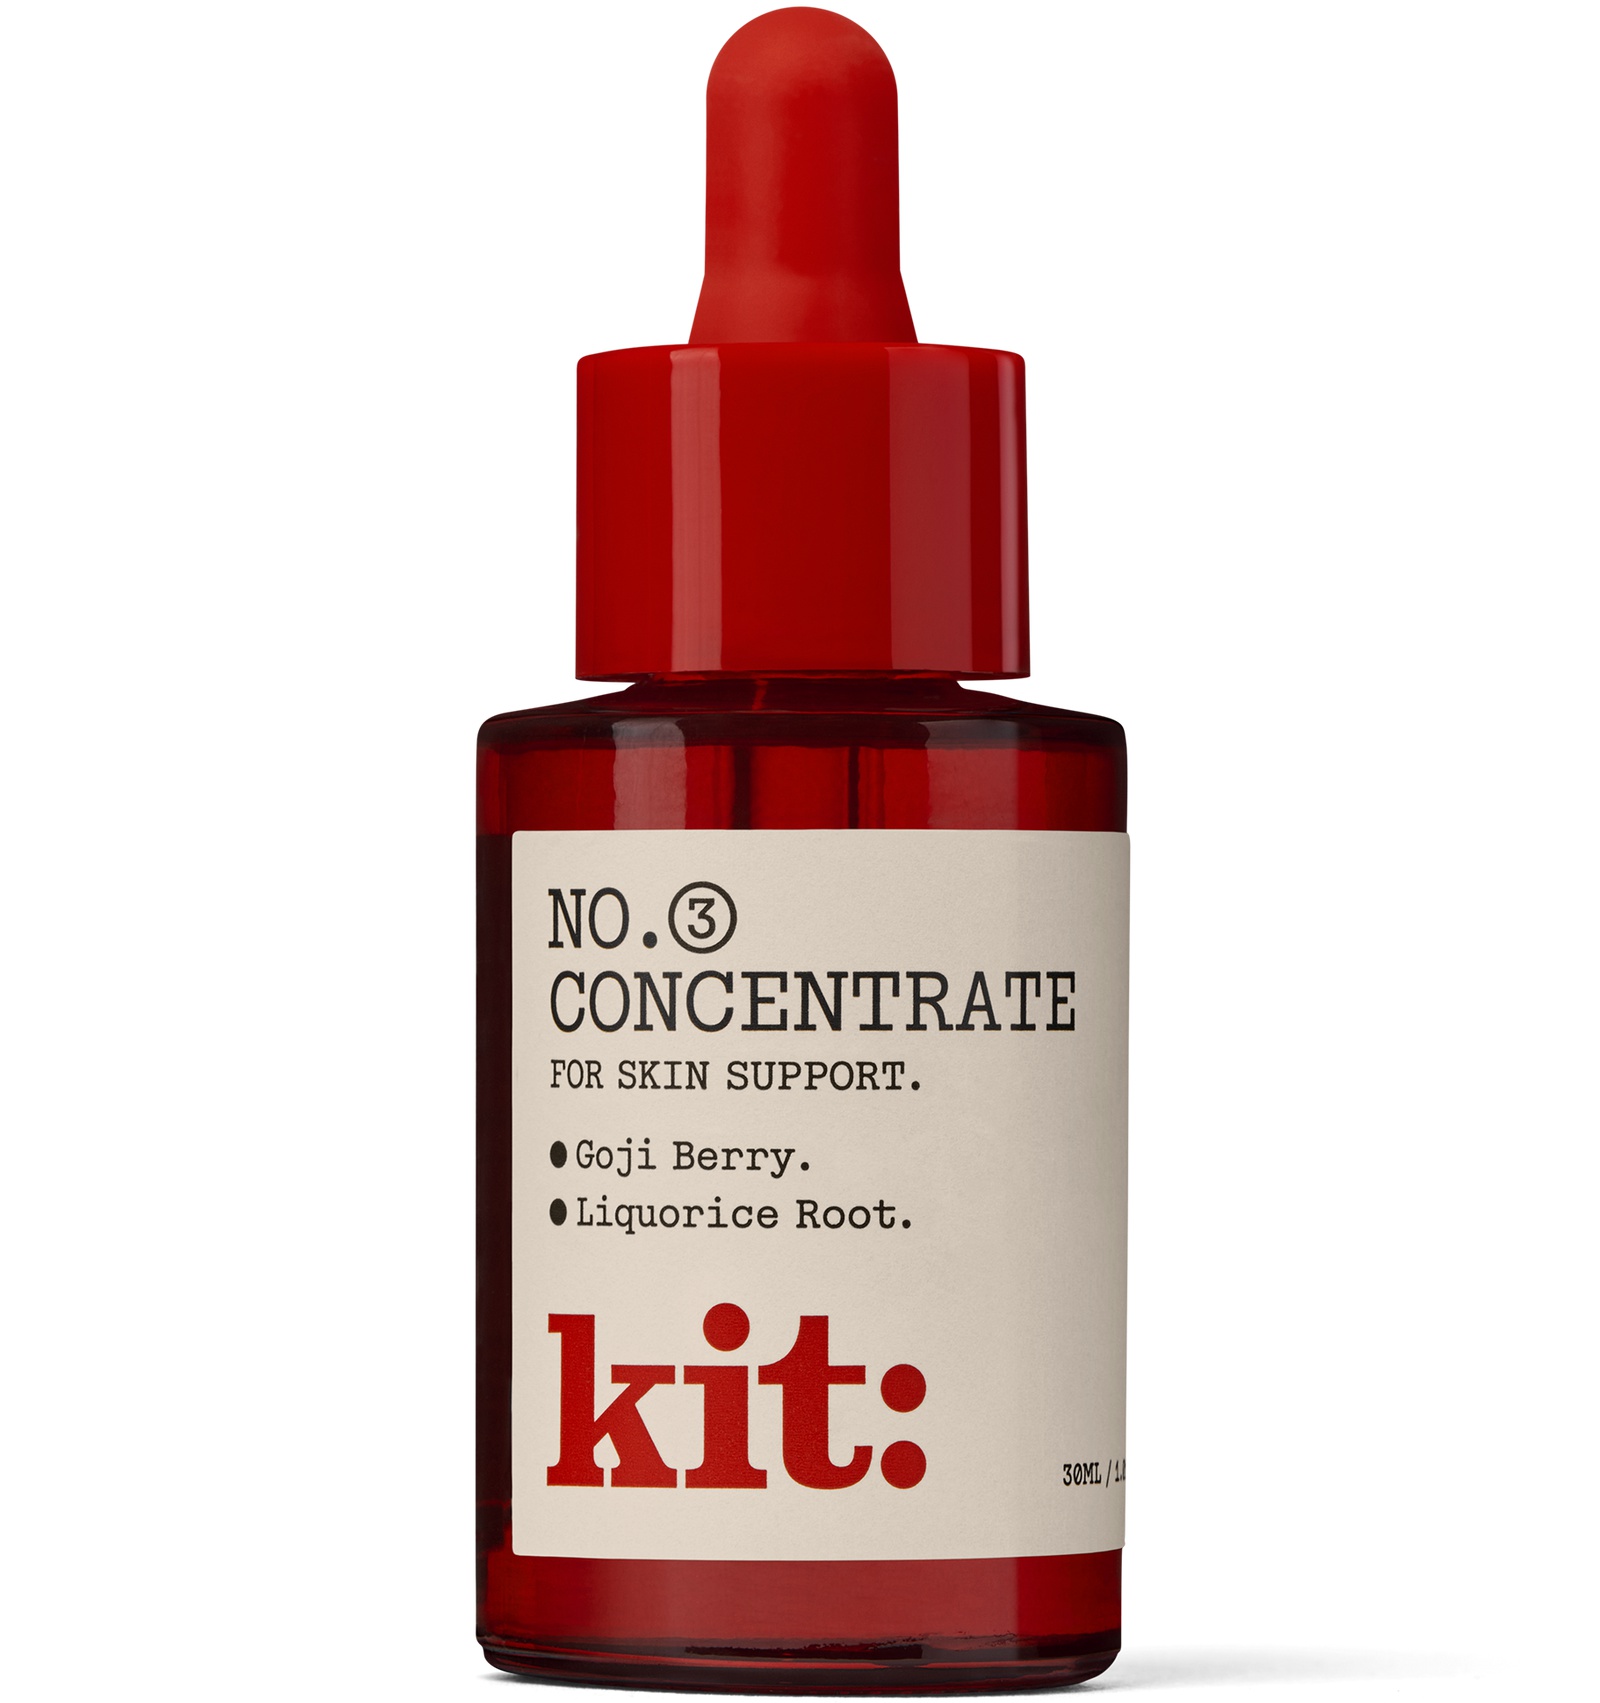 Kit: No. 3 Concentrate